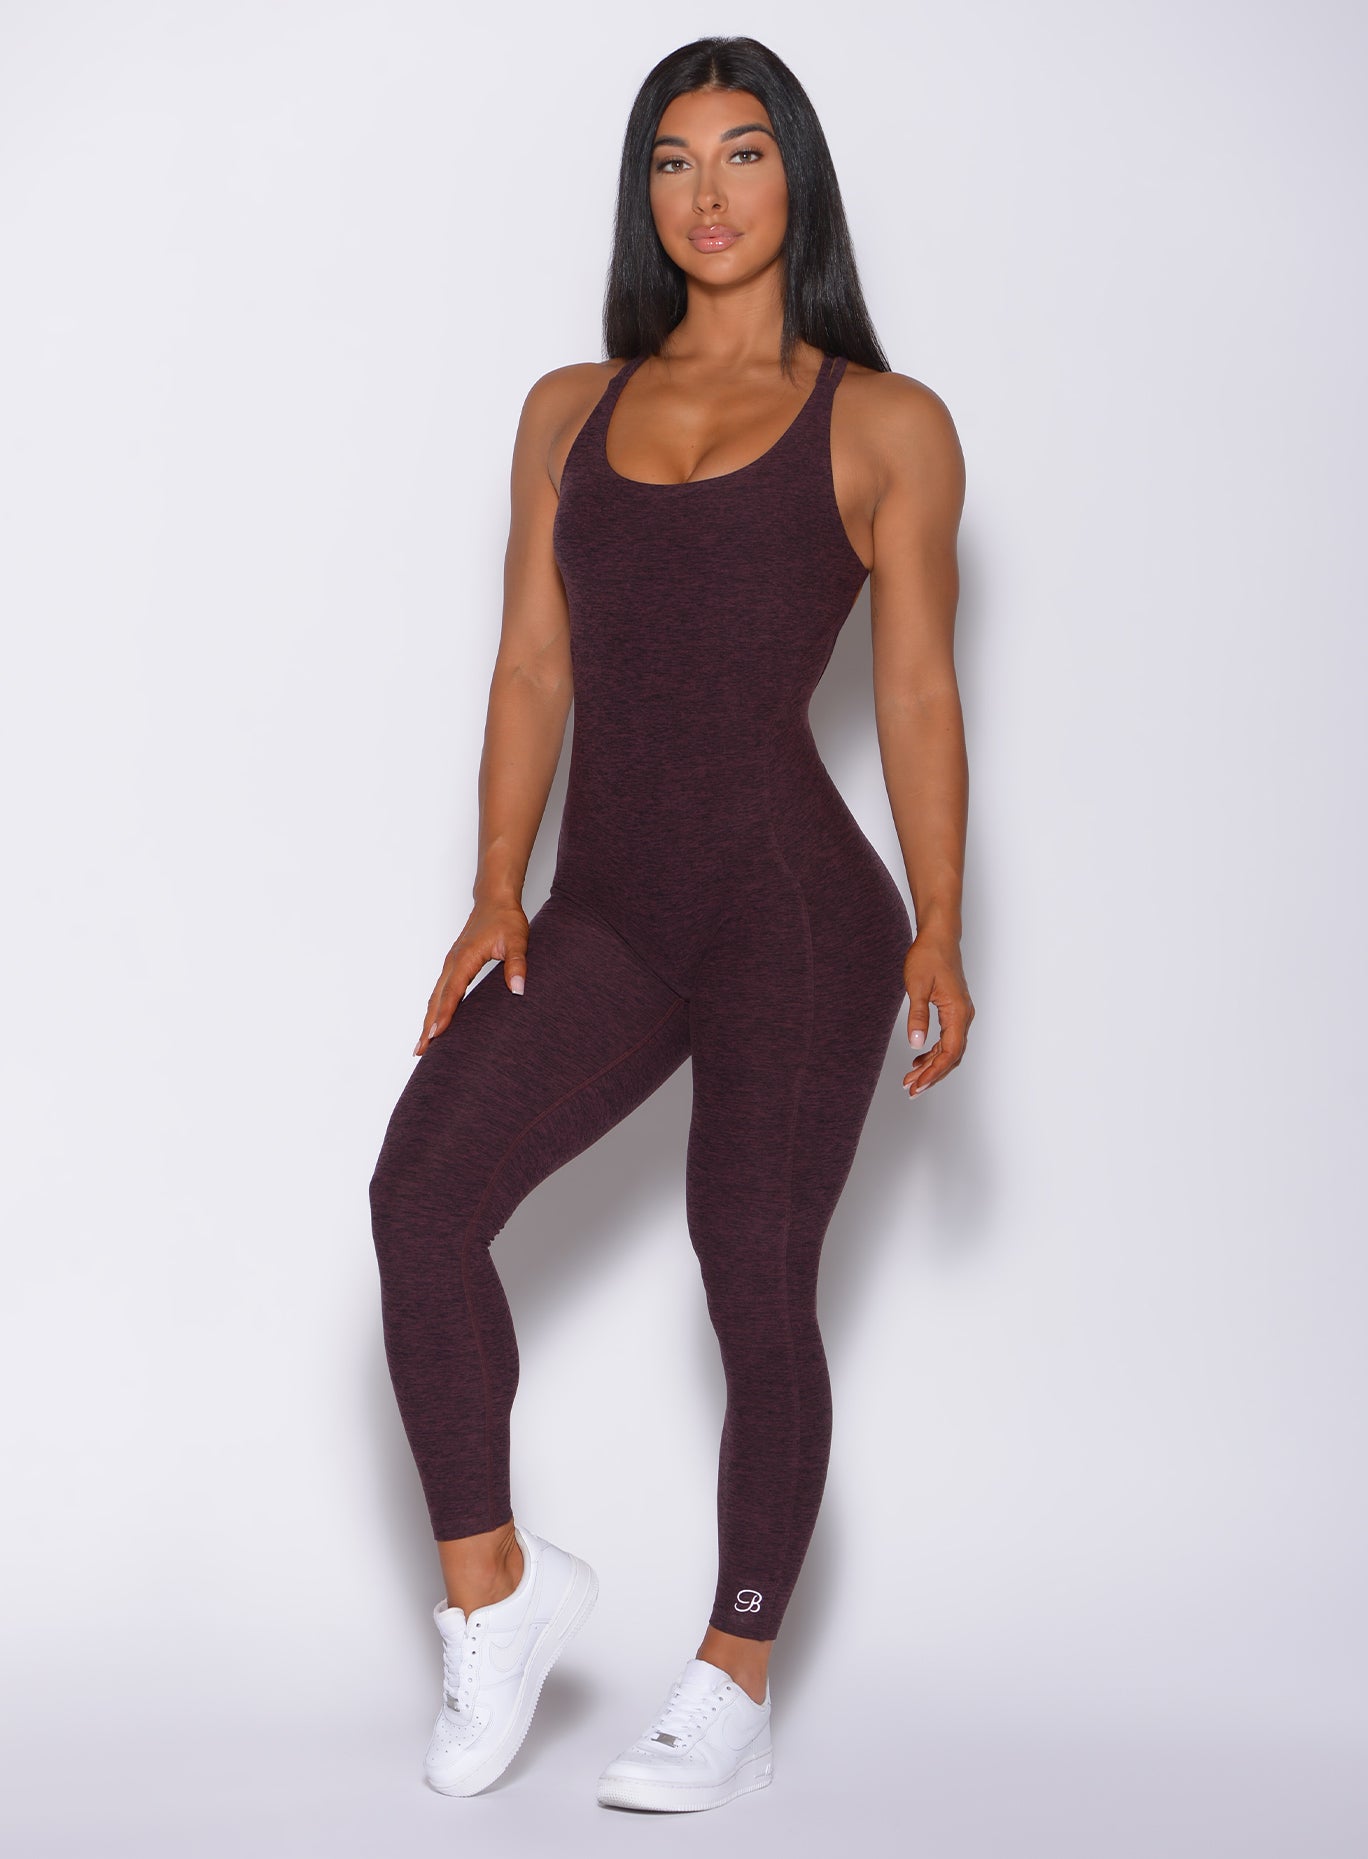 Picture of a model facing forward wearing our form bodysuit in port color 